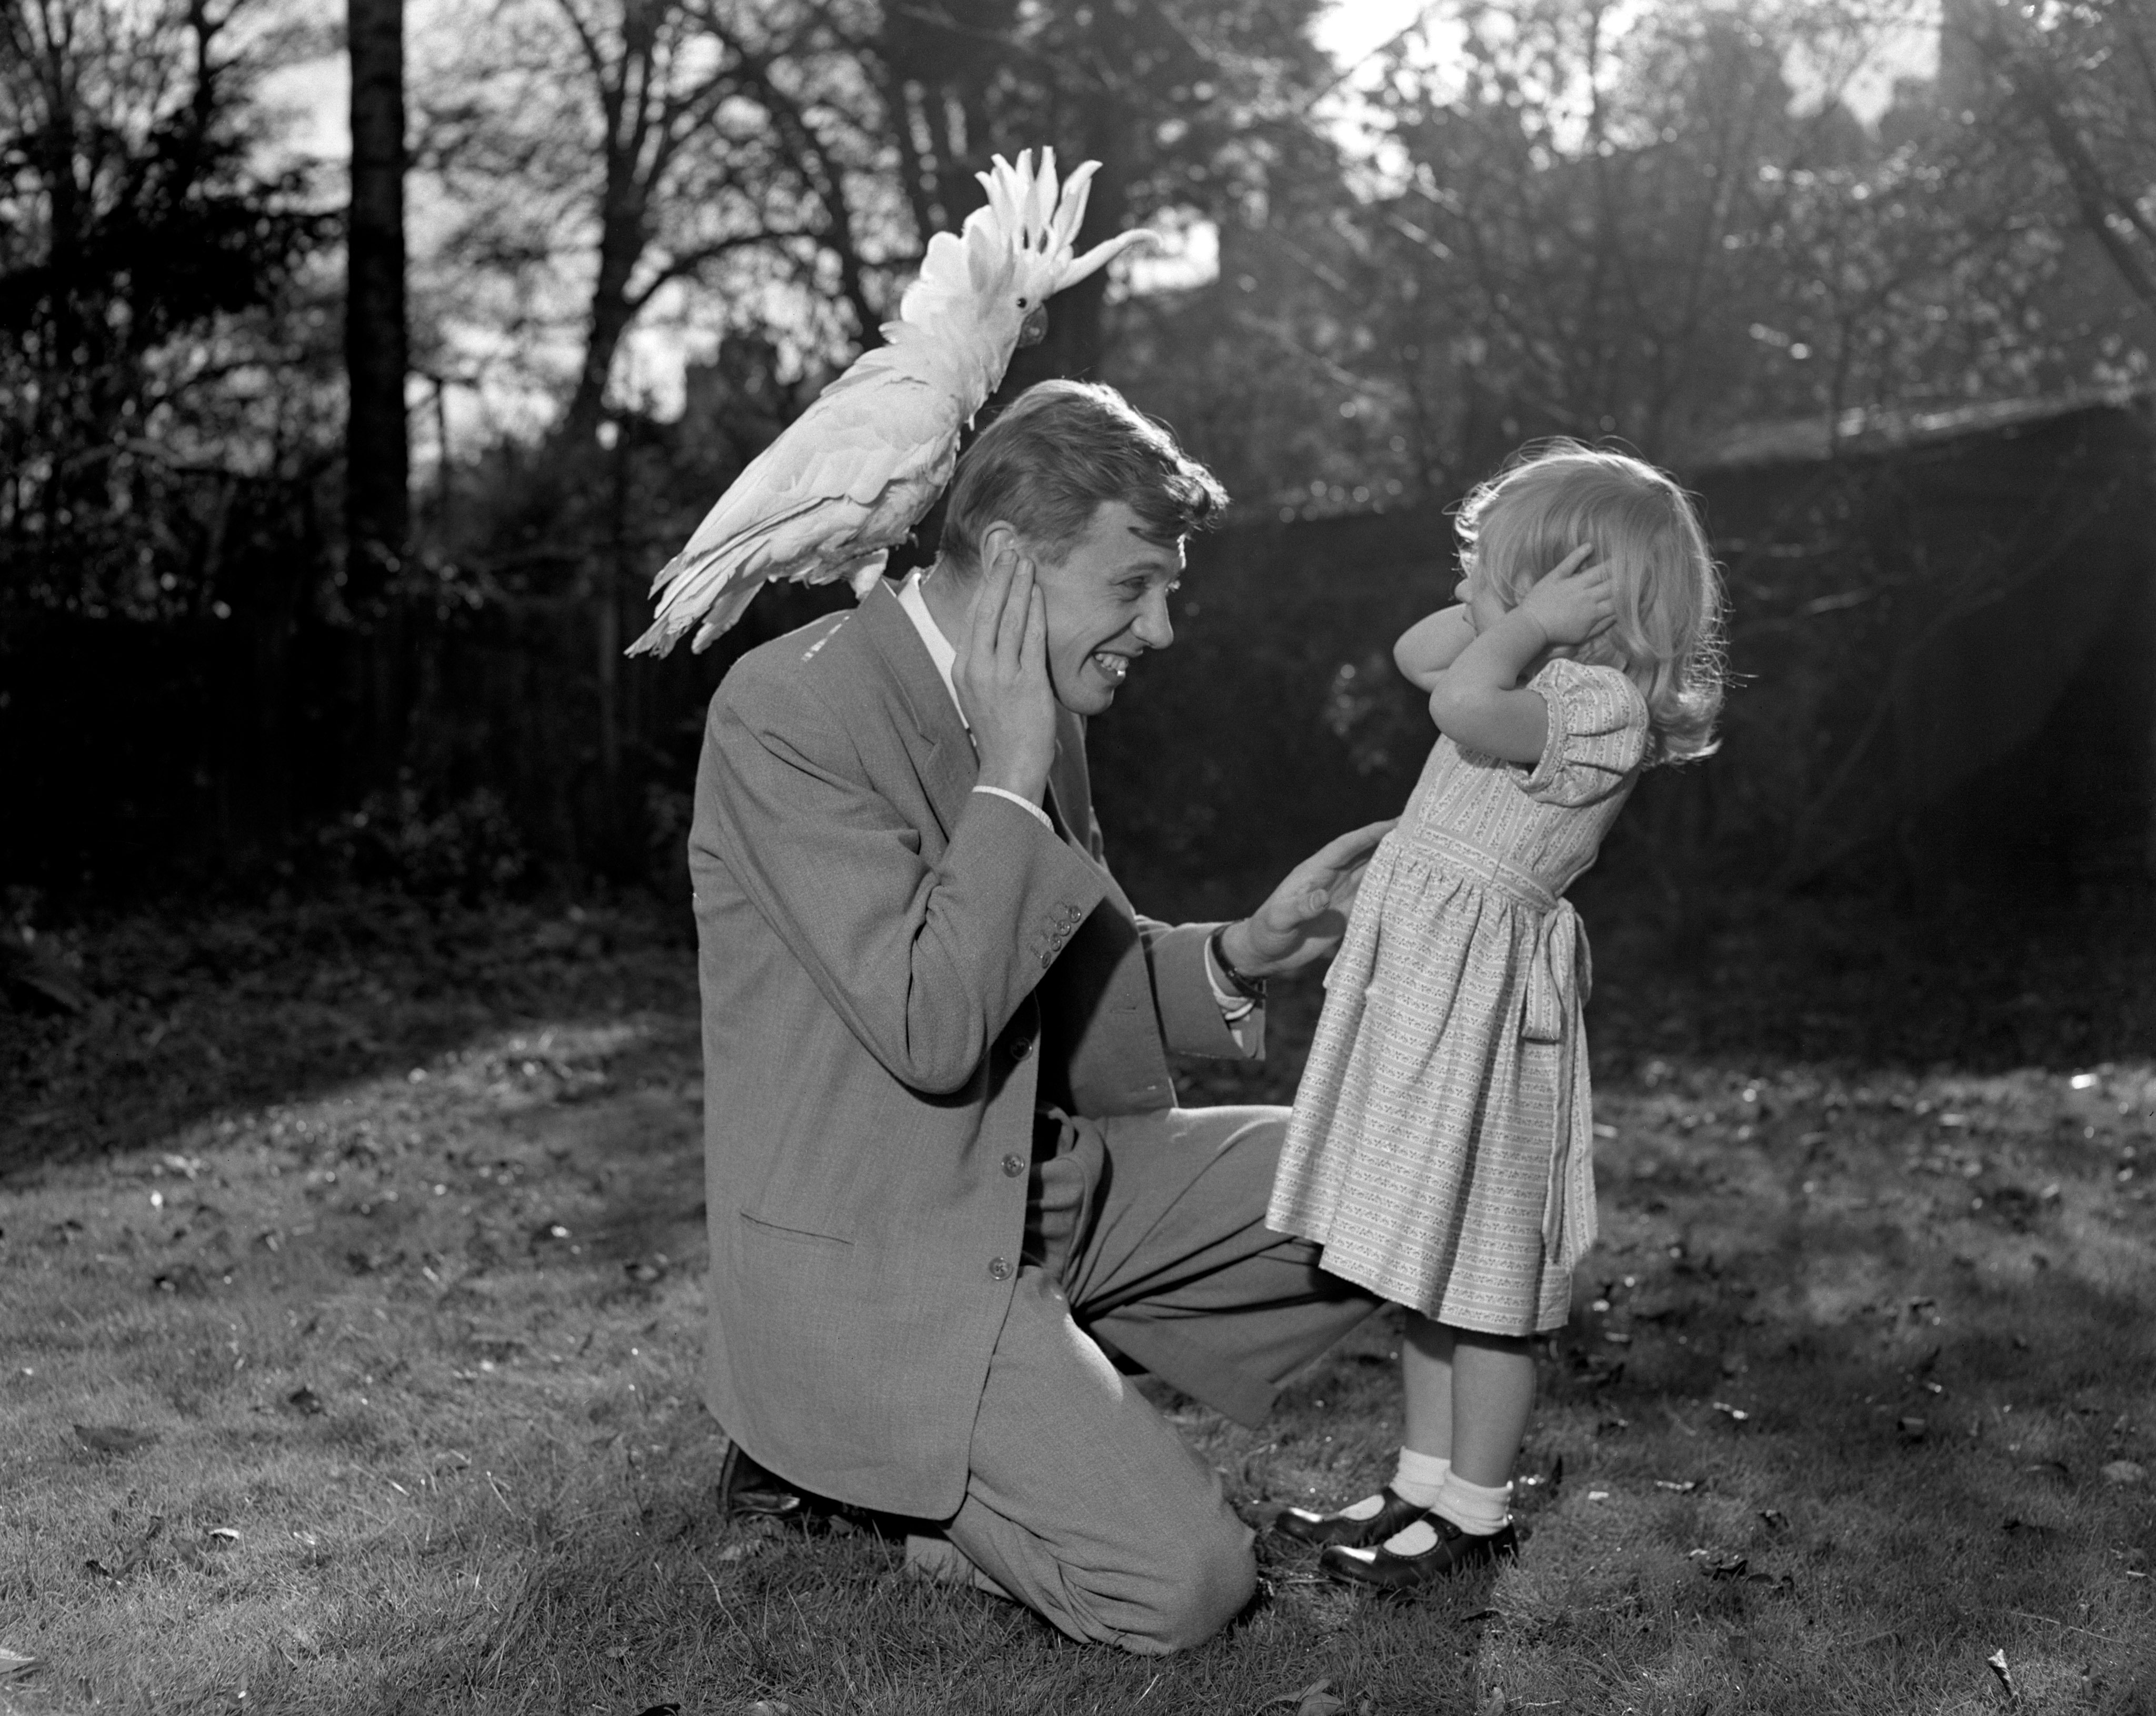 David Attenborough and his daughter Susan with a sulphur-crested cockatoo called Georgie in 1957